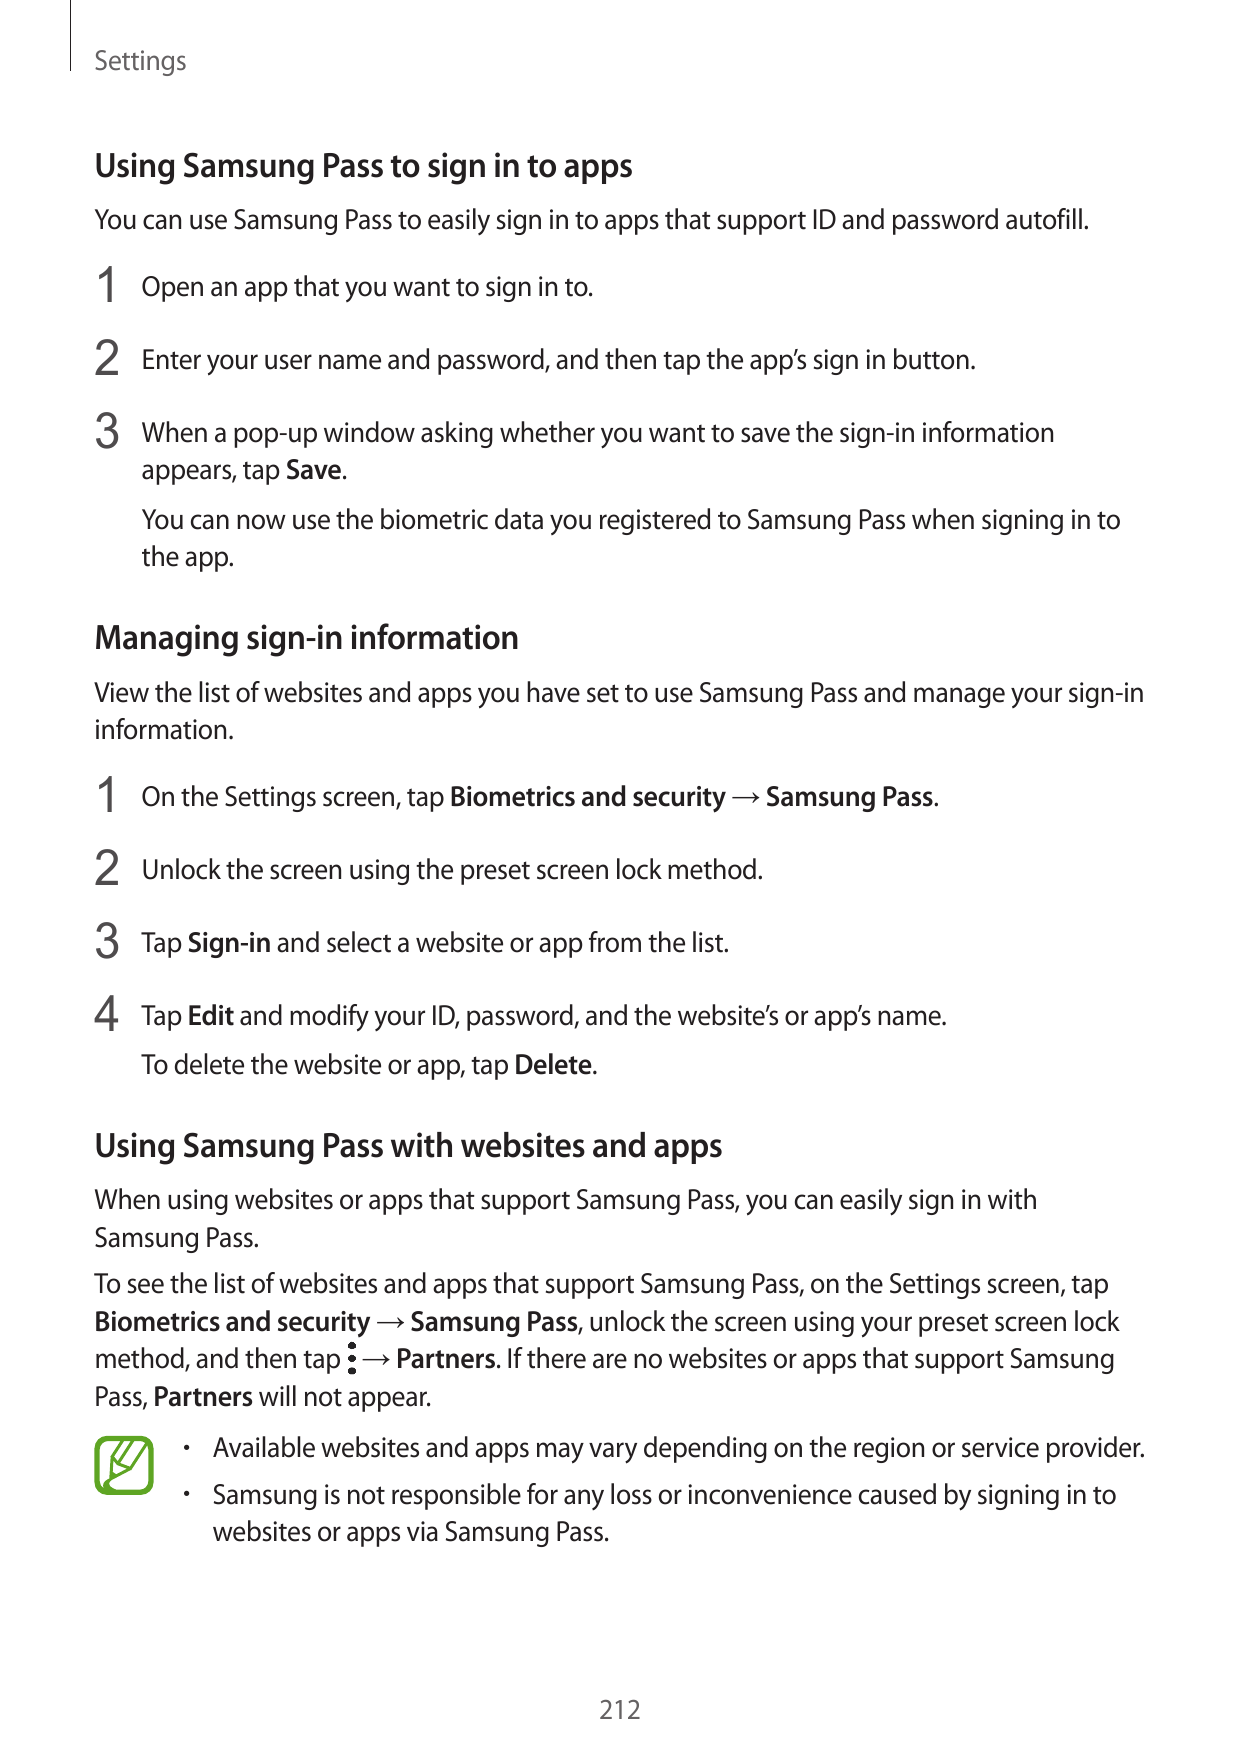 SettingsUsing Samsung Pass to sign in to appsYou can use Samsung Pass to easily sign in to apps that support ID and password aut